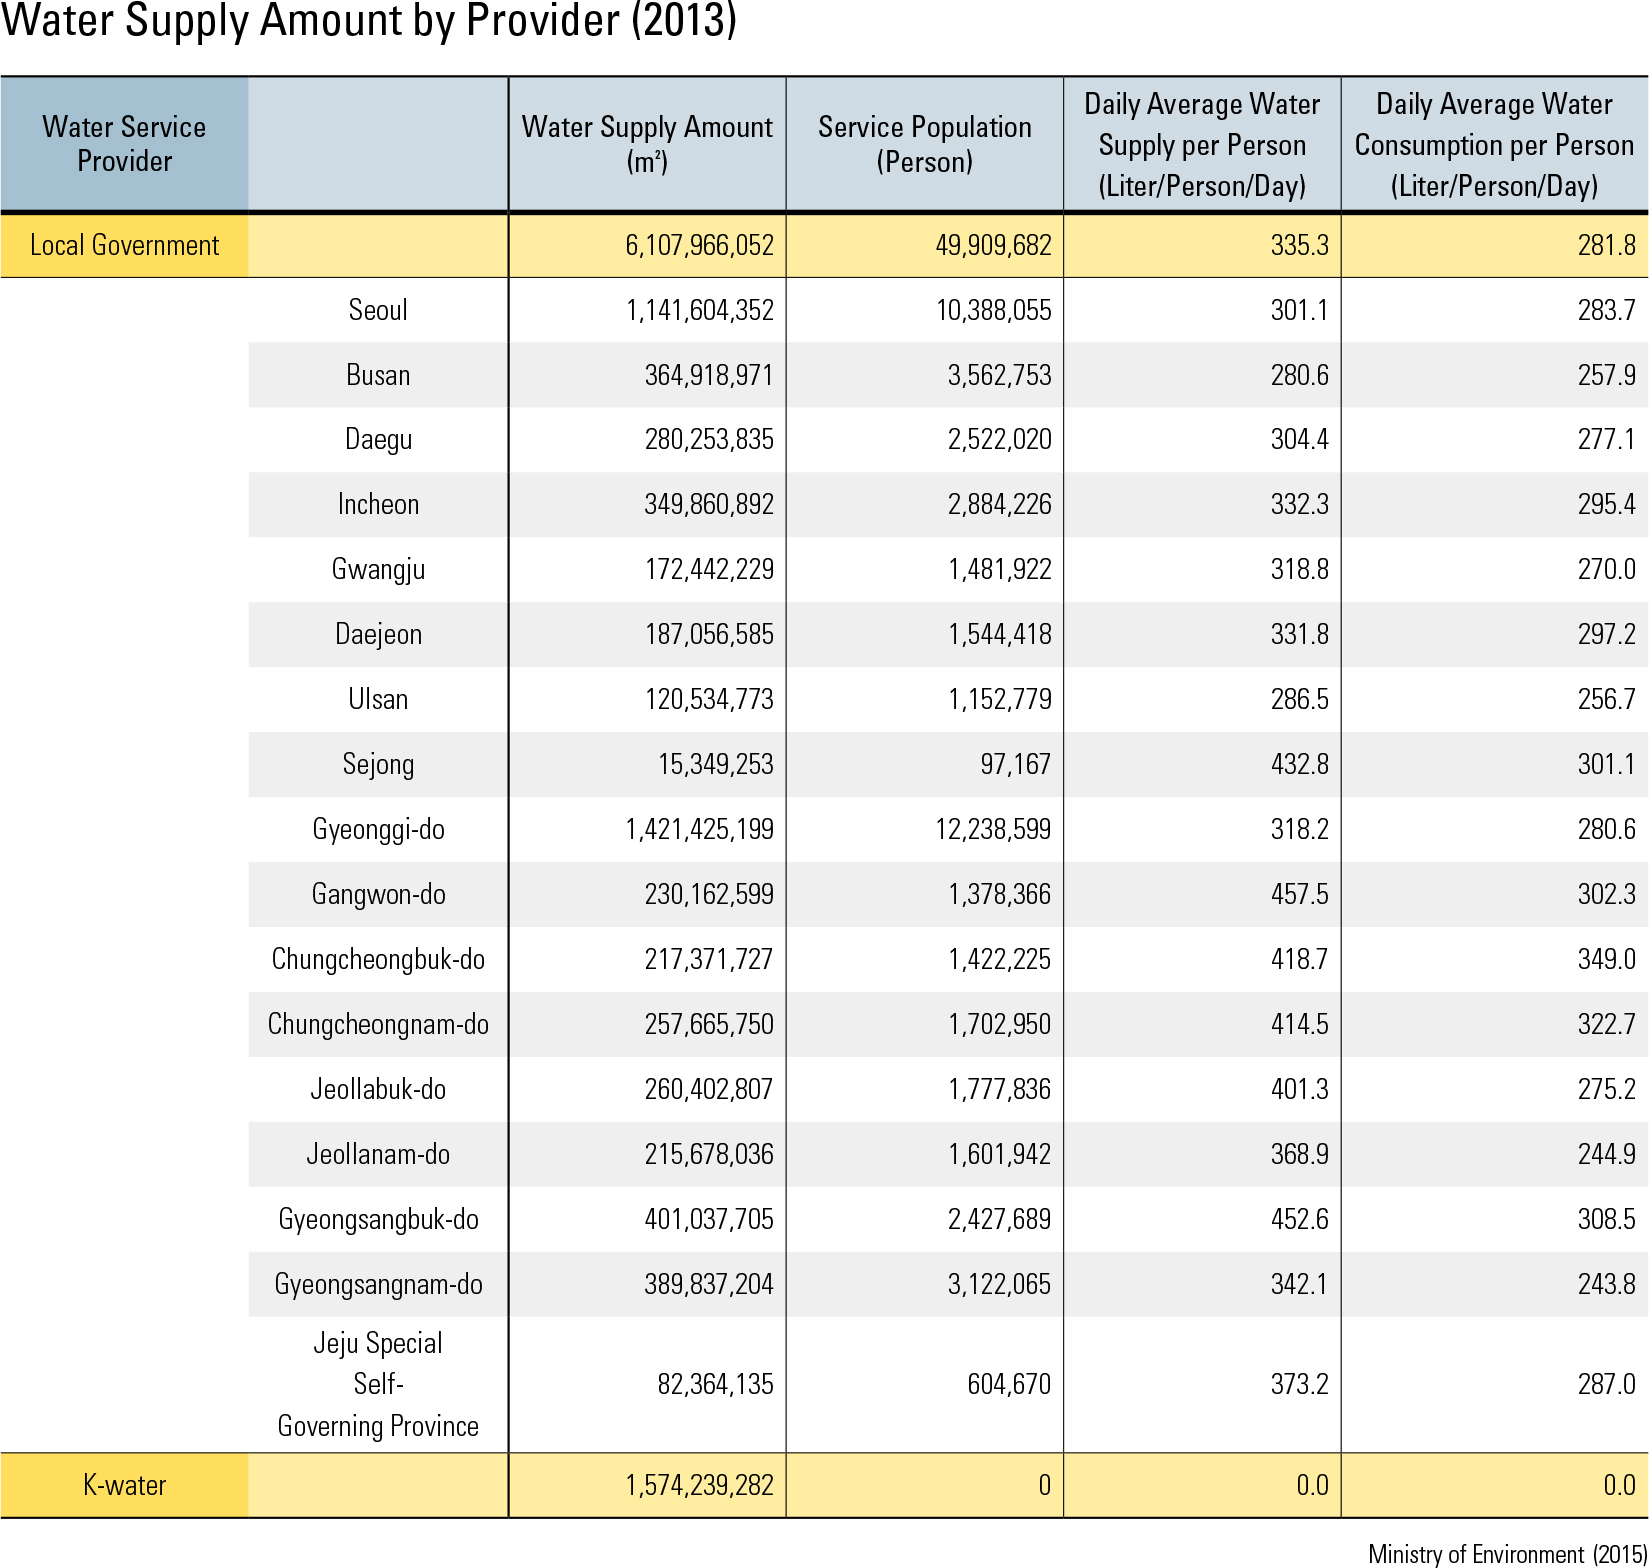 Water Supply Amount by Provider (2013)<p class="oz_zoom" zimg="http://imagedata.cafe24.com/us_3/us3_19-1_2.jpg"><span style="font-family:Nanum Myeongjo;"><span style="font-size:18px;"><span class="label label-danger">UPDATE DATA</span></span></p>